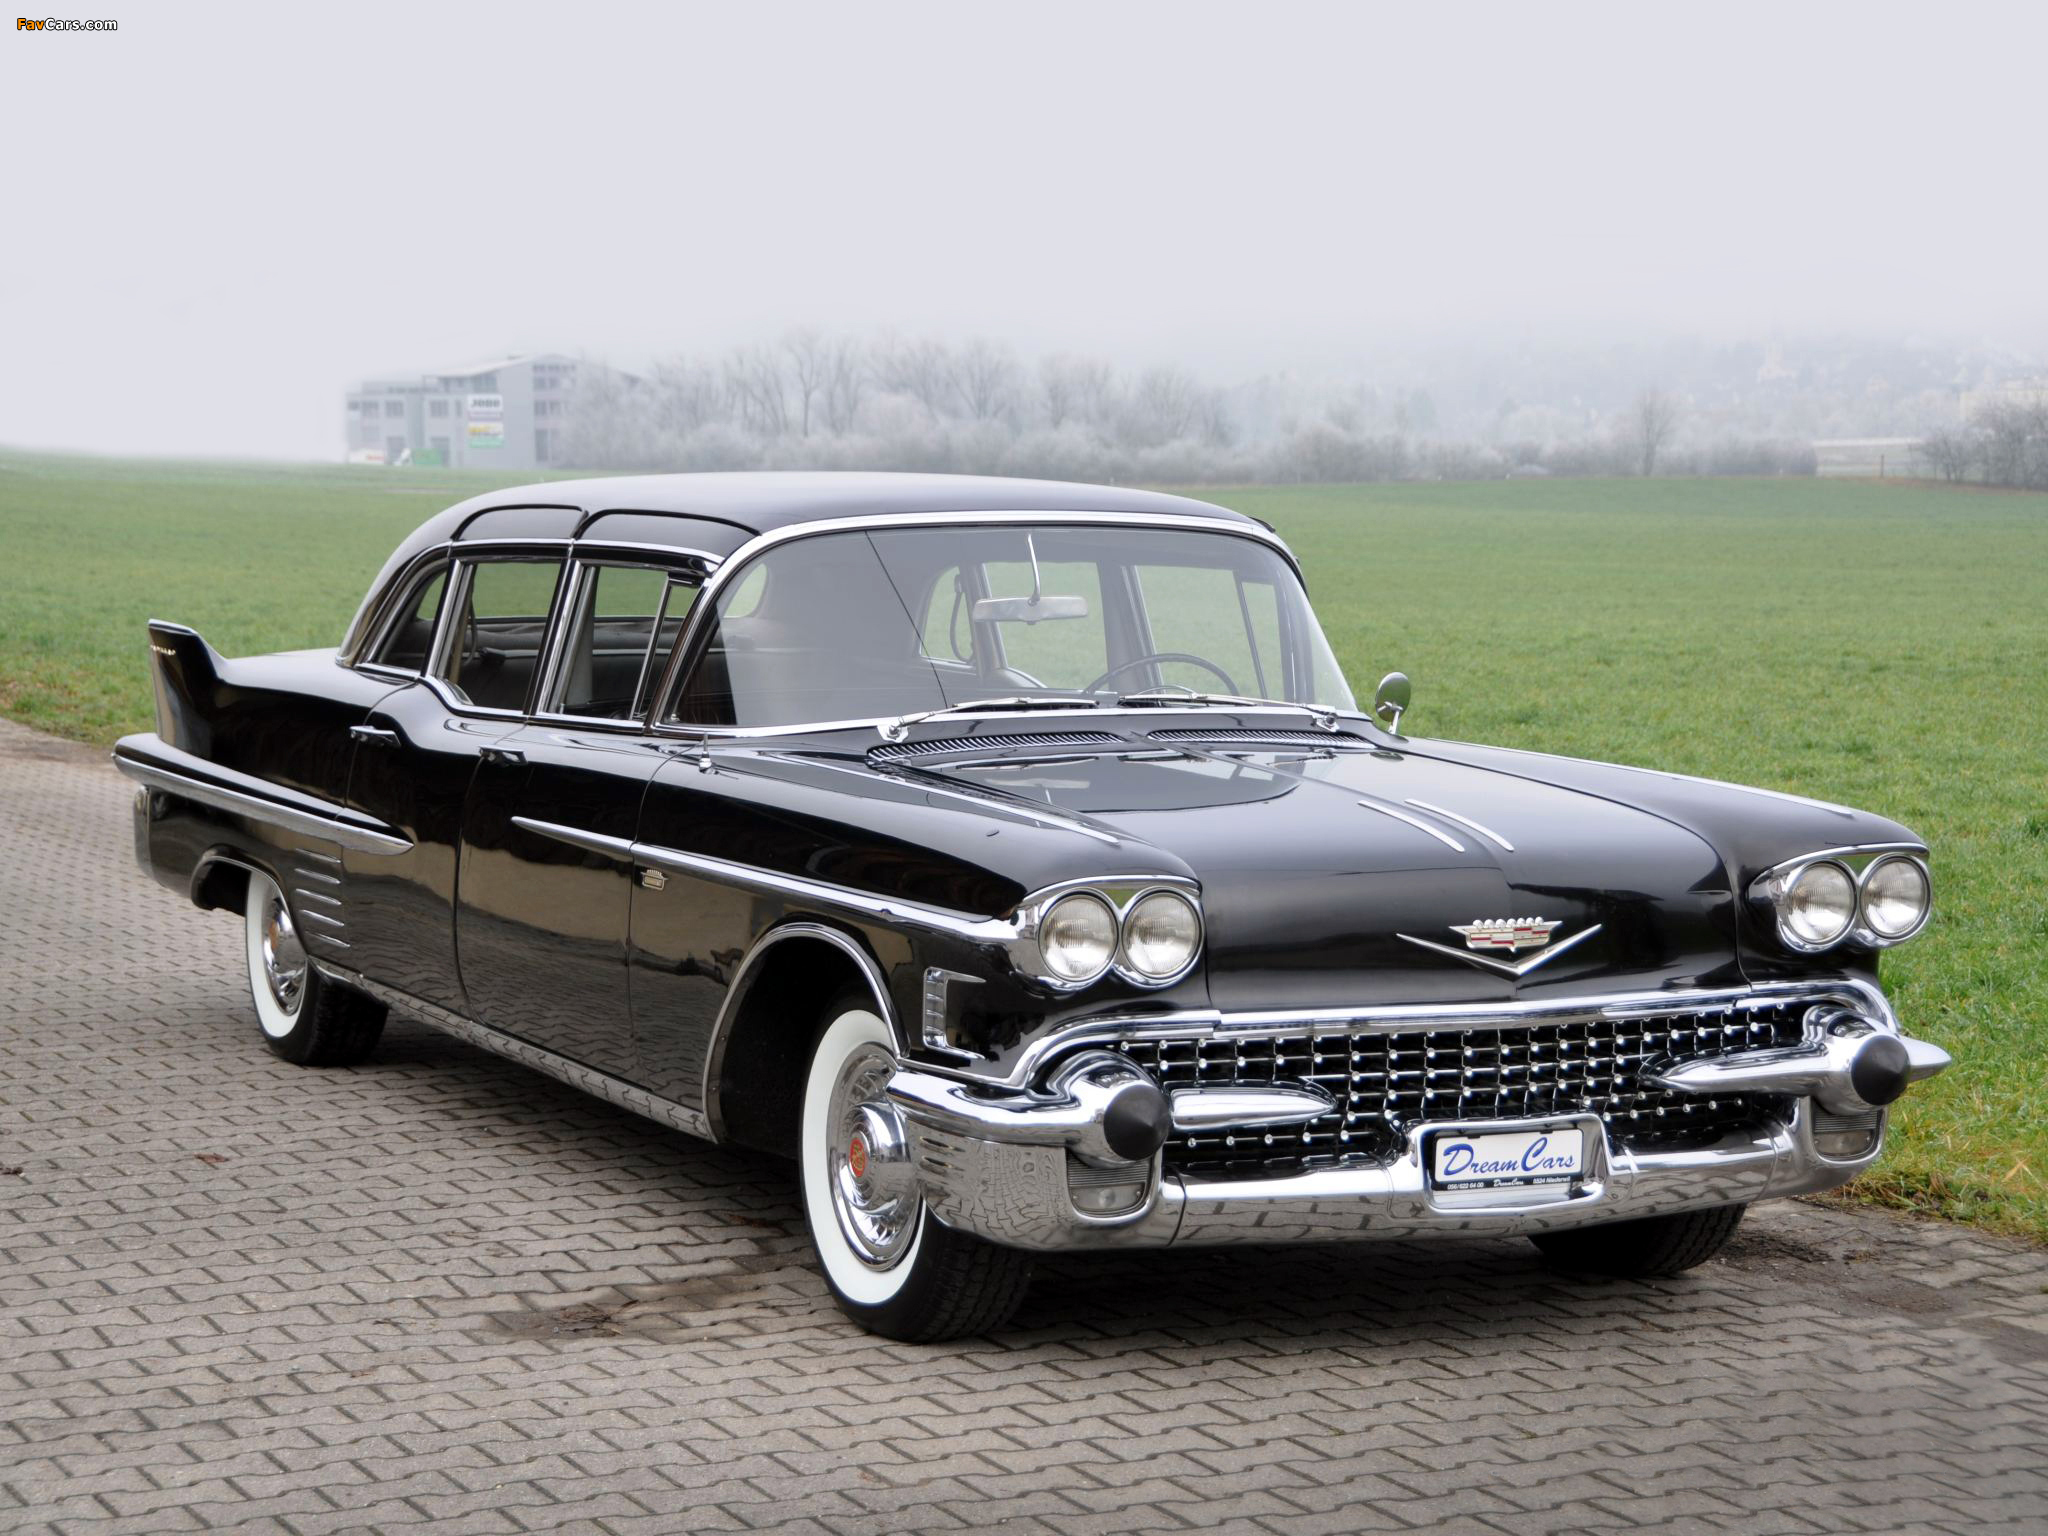 Pictures of Cadillac Fleetwood Seventy-Five Limousine 1958 (2048 x 1536)